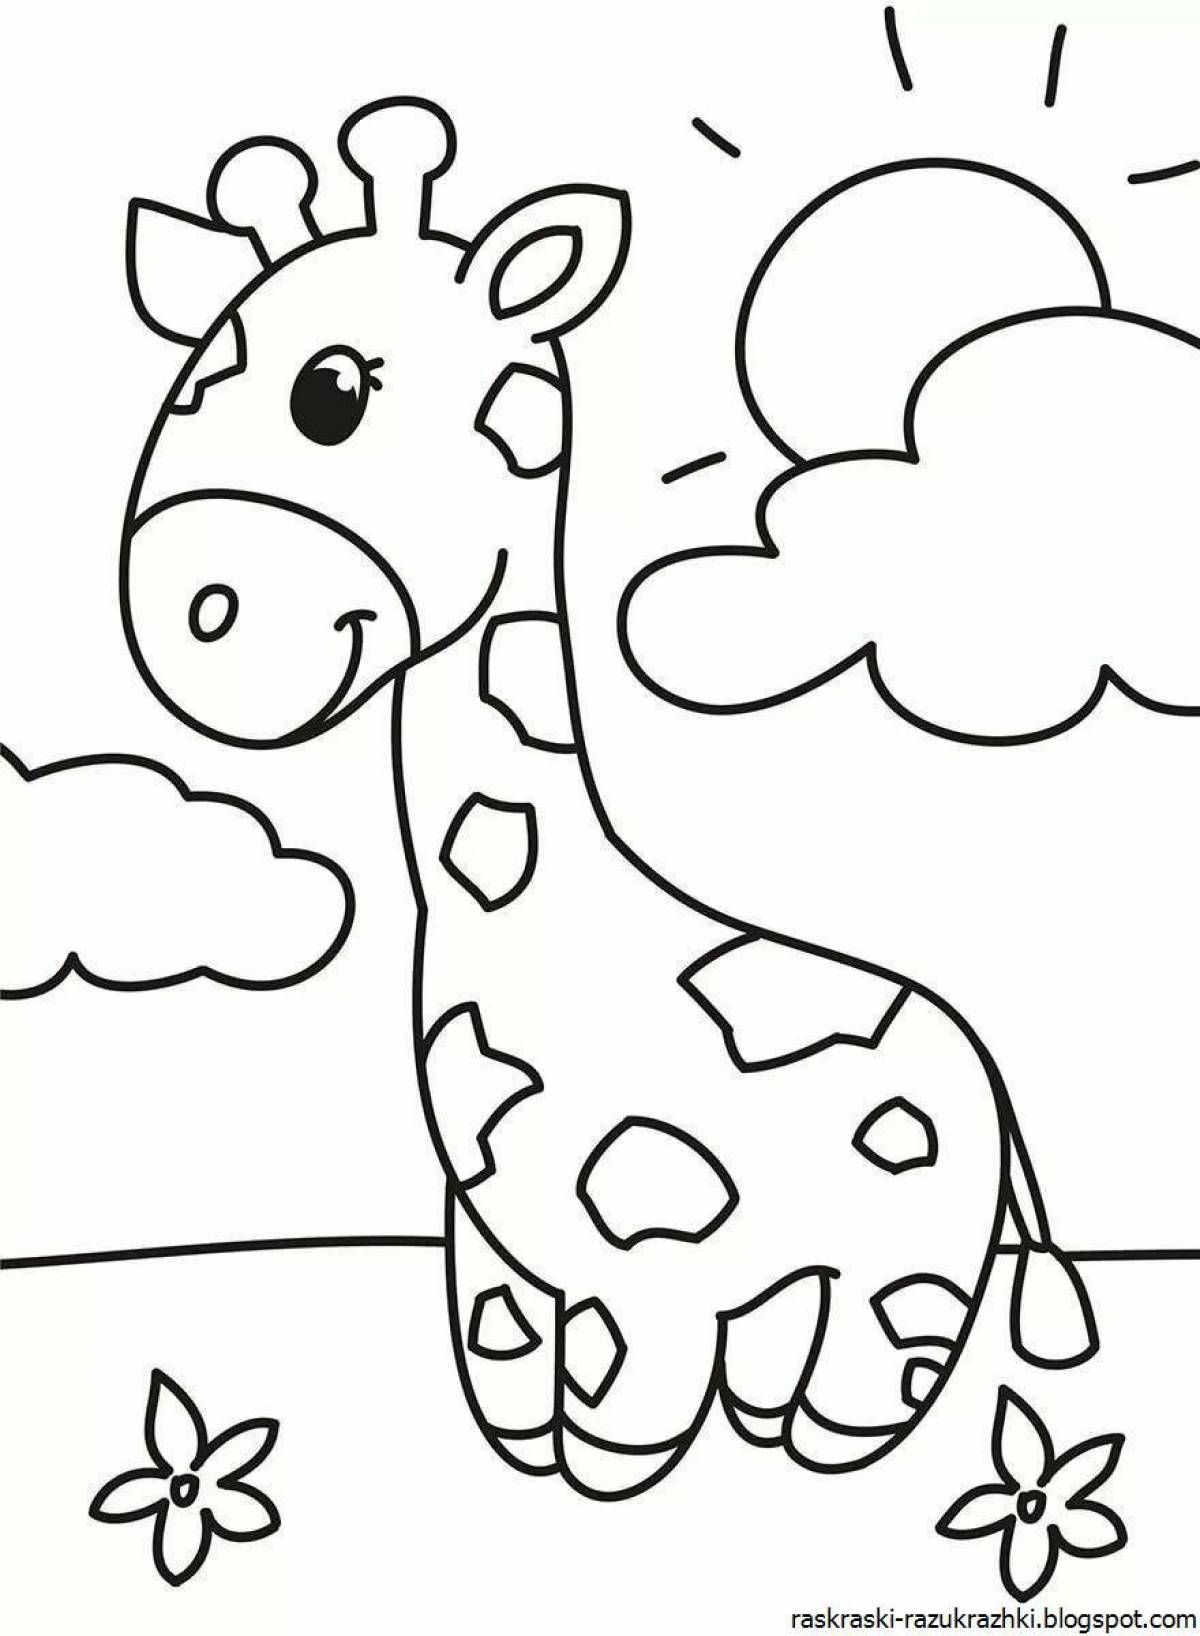 Explosion coloring book for 4-5 year olds